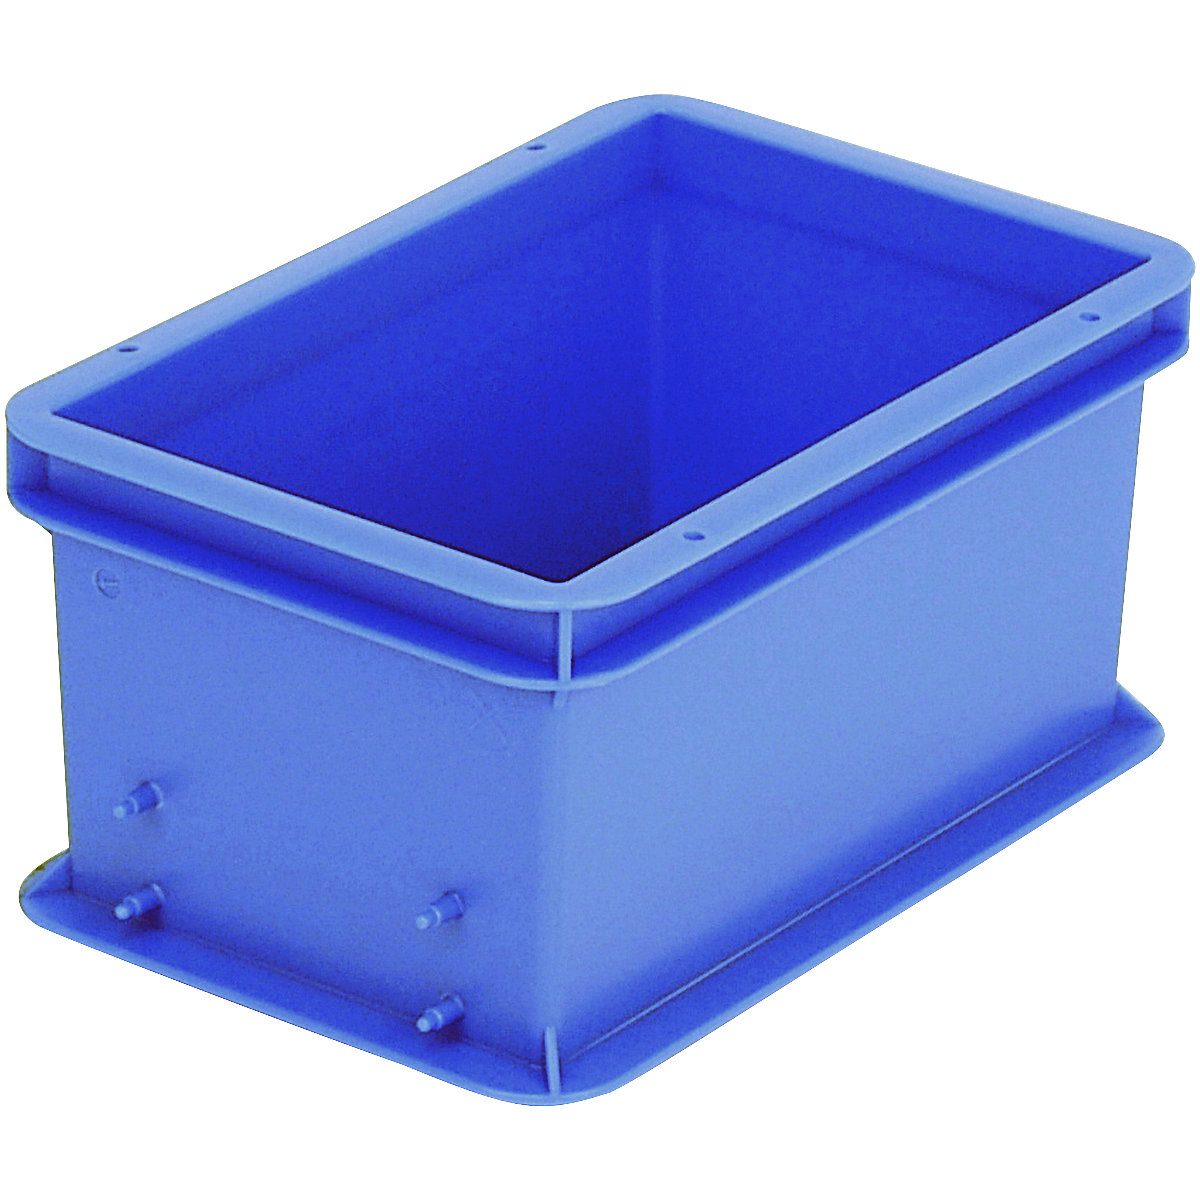 BN Euro stacking container - BITO